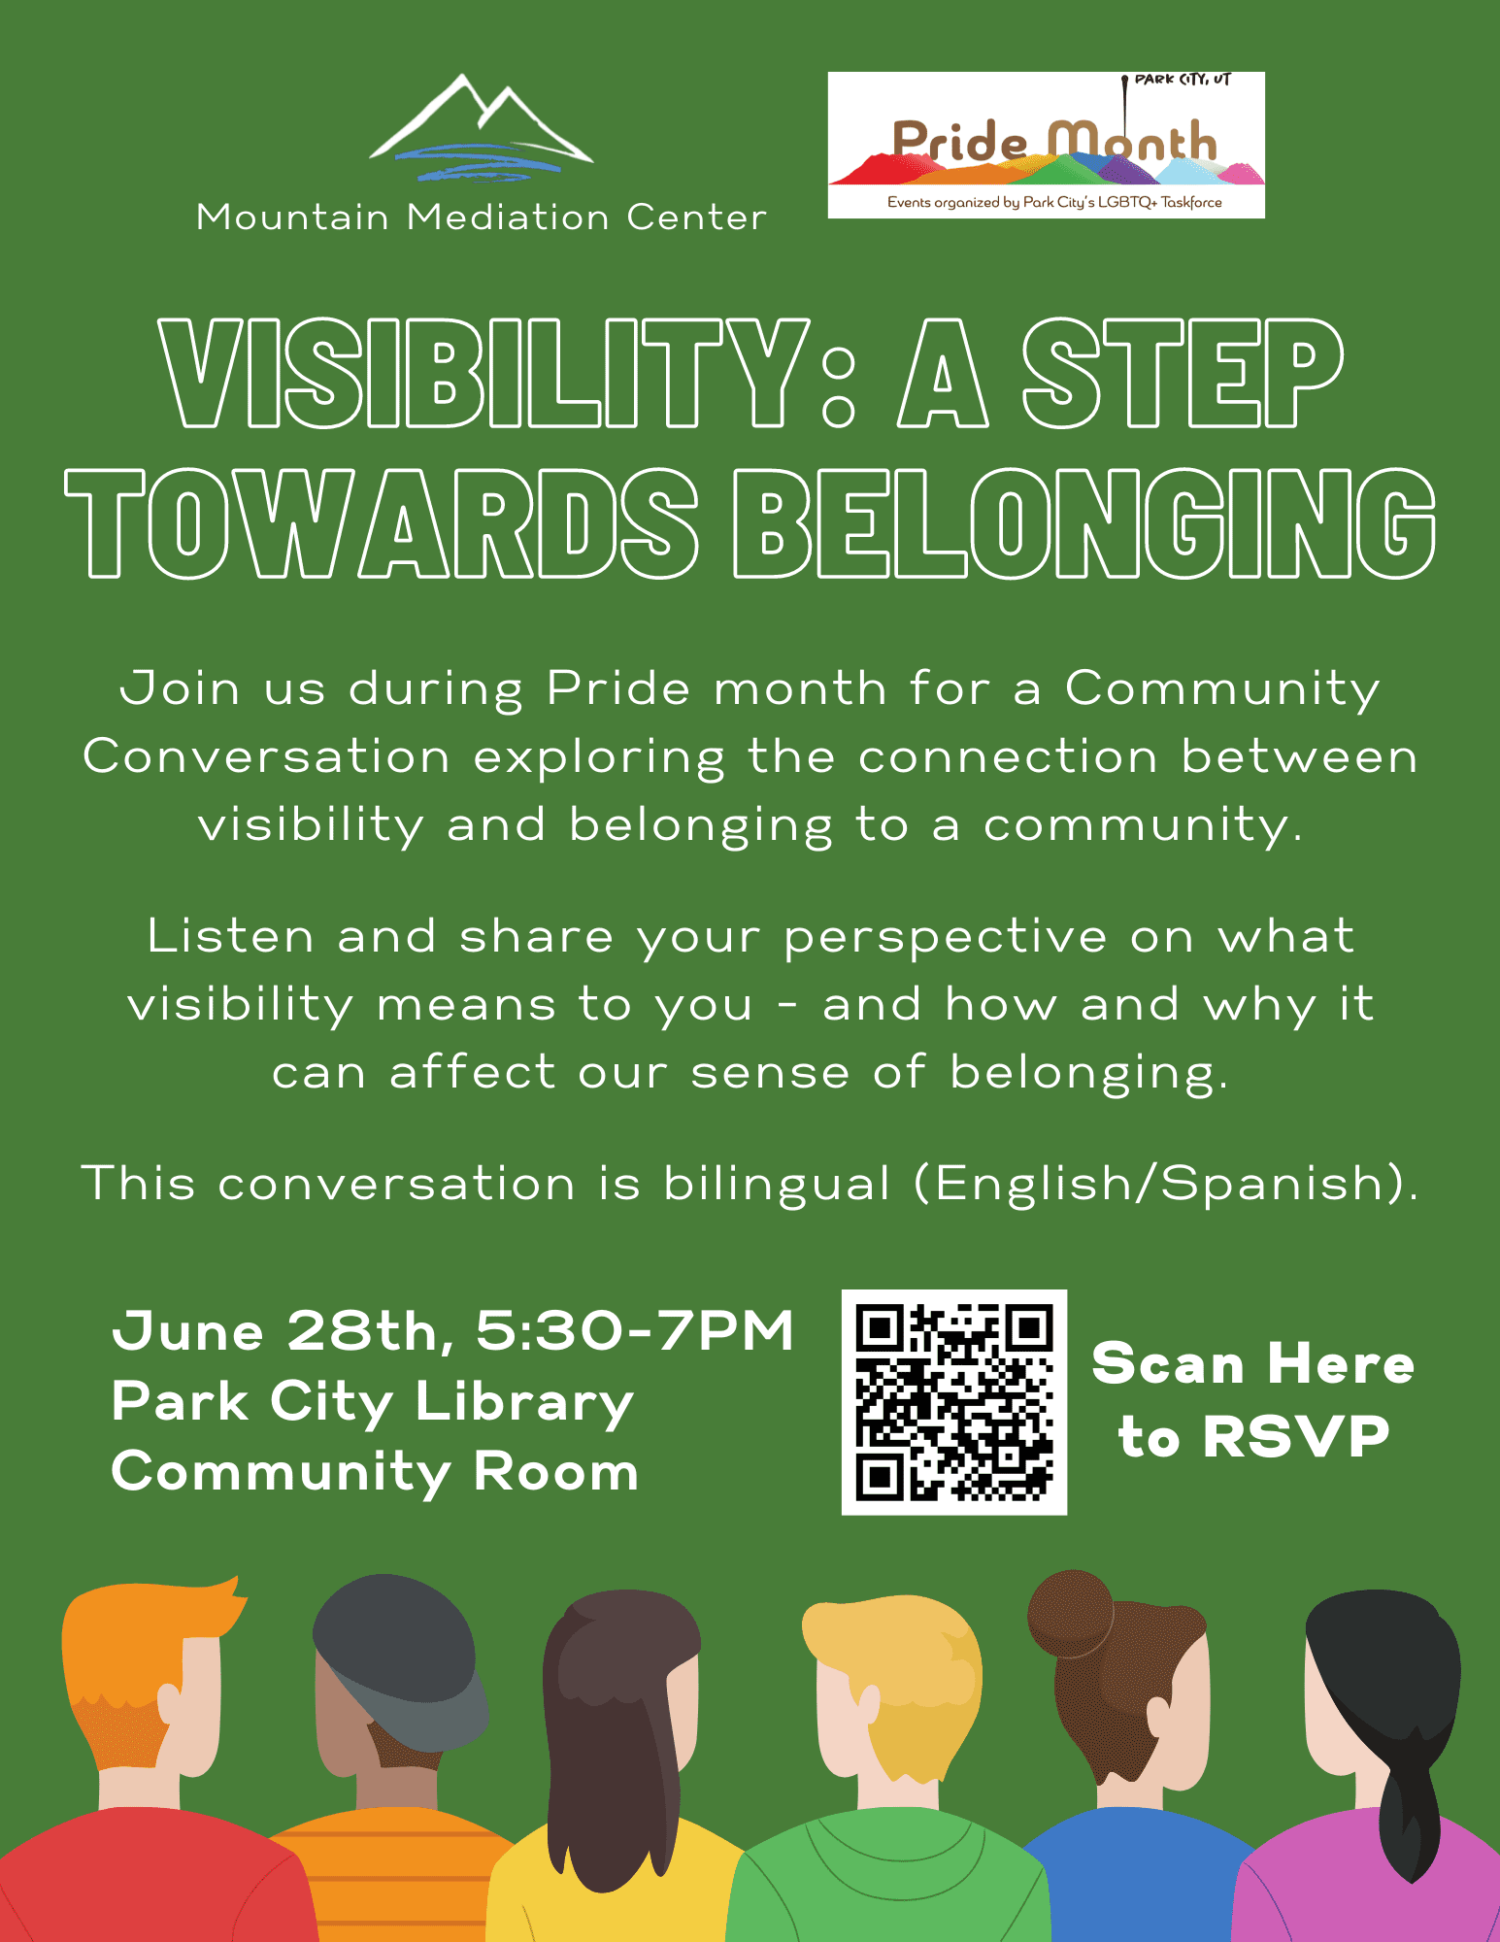 Flyer for conversation on June 28th.